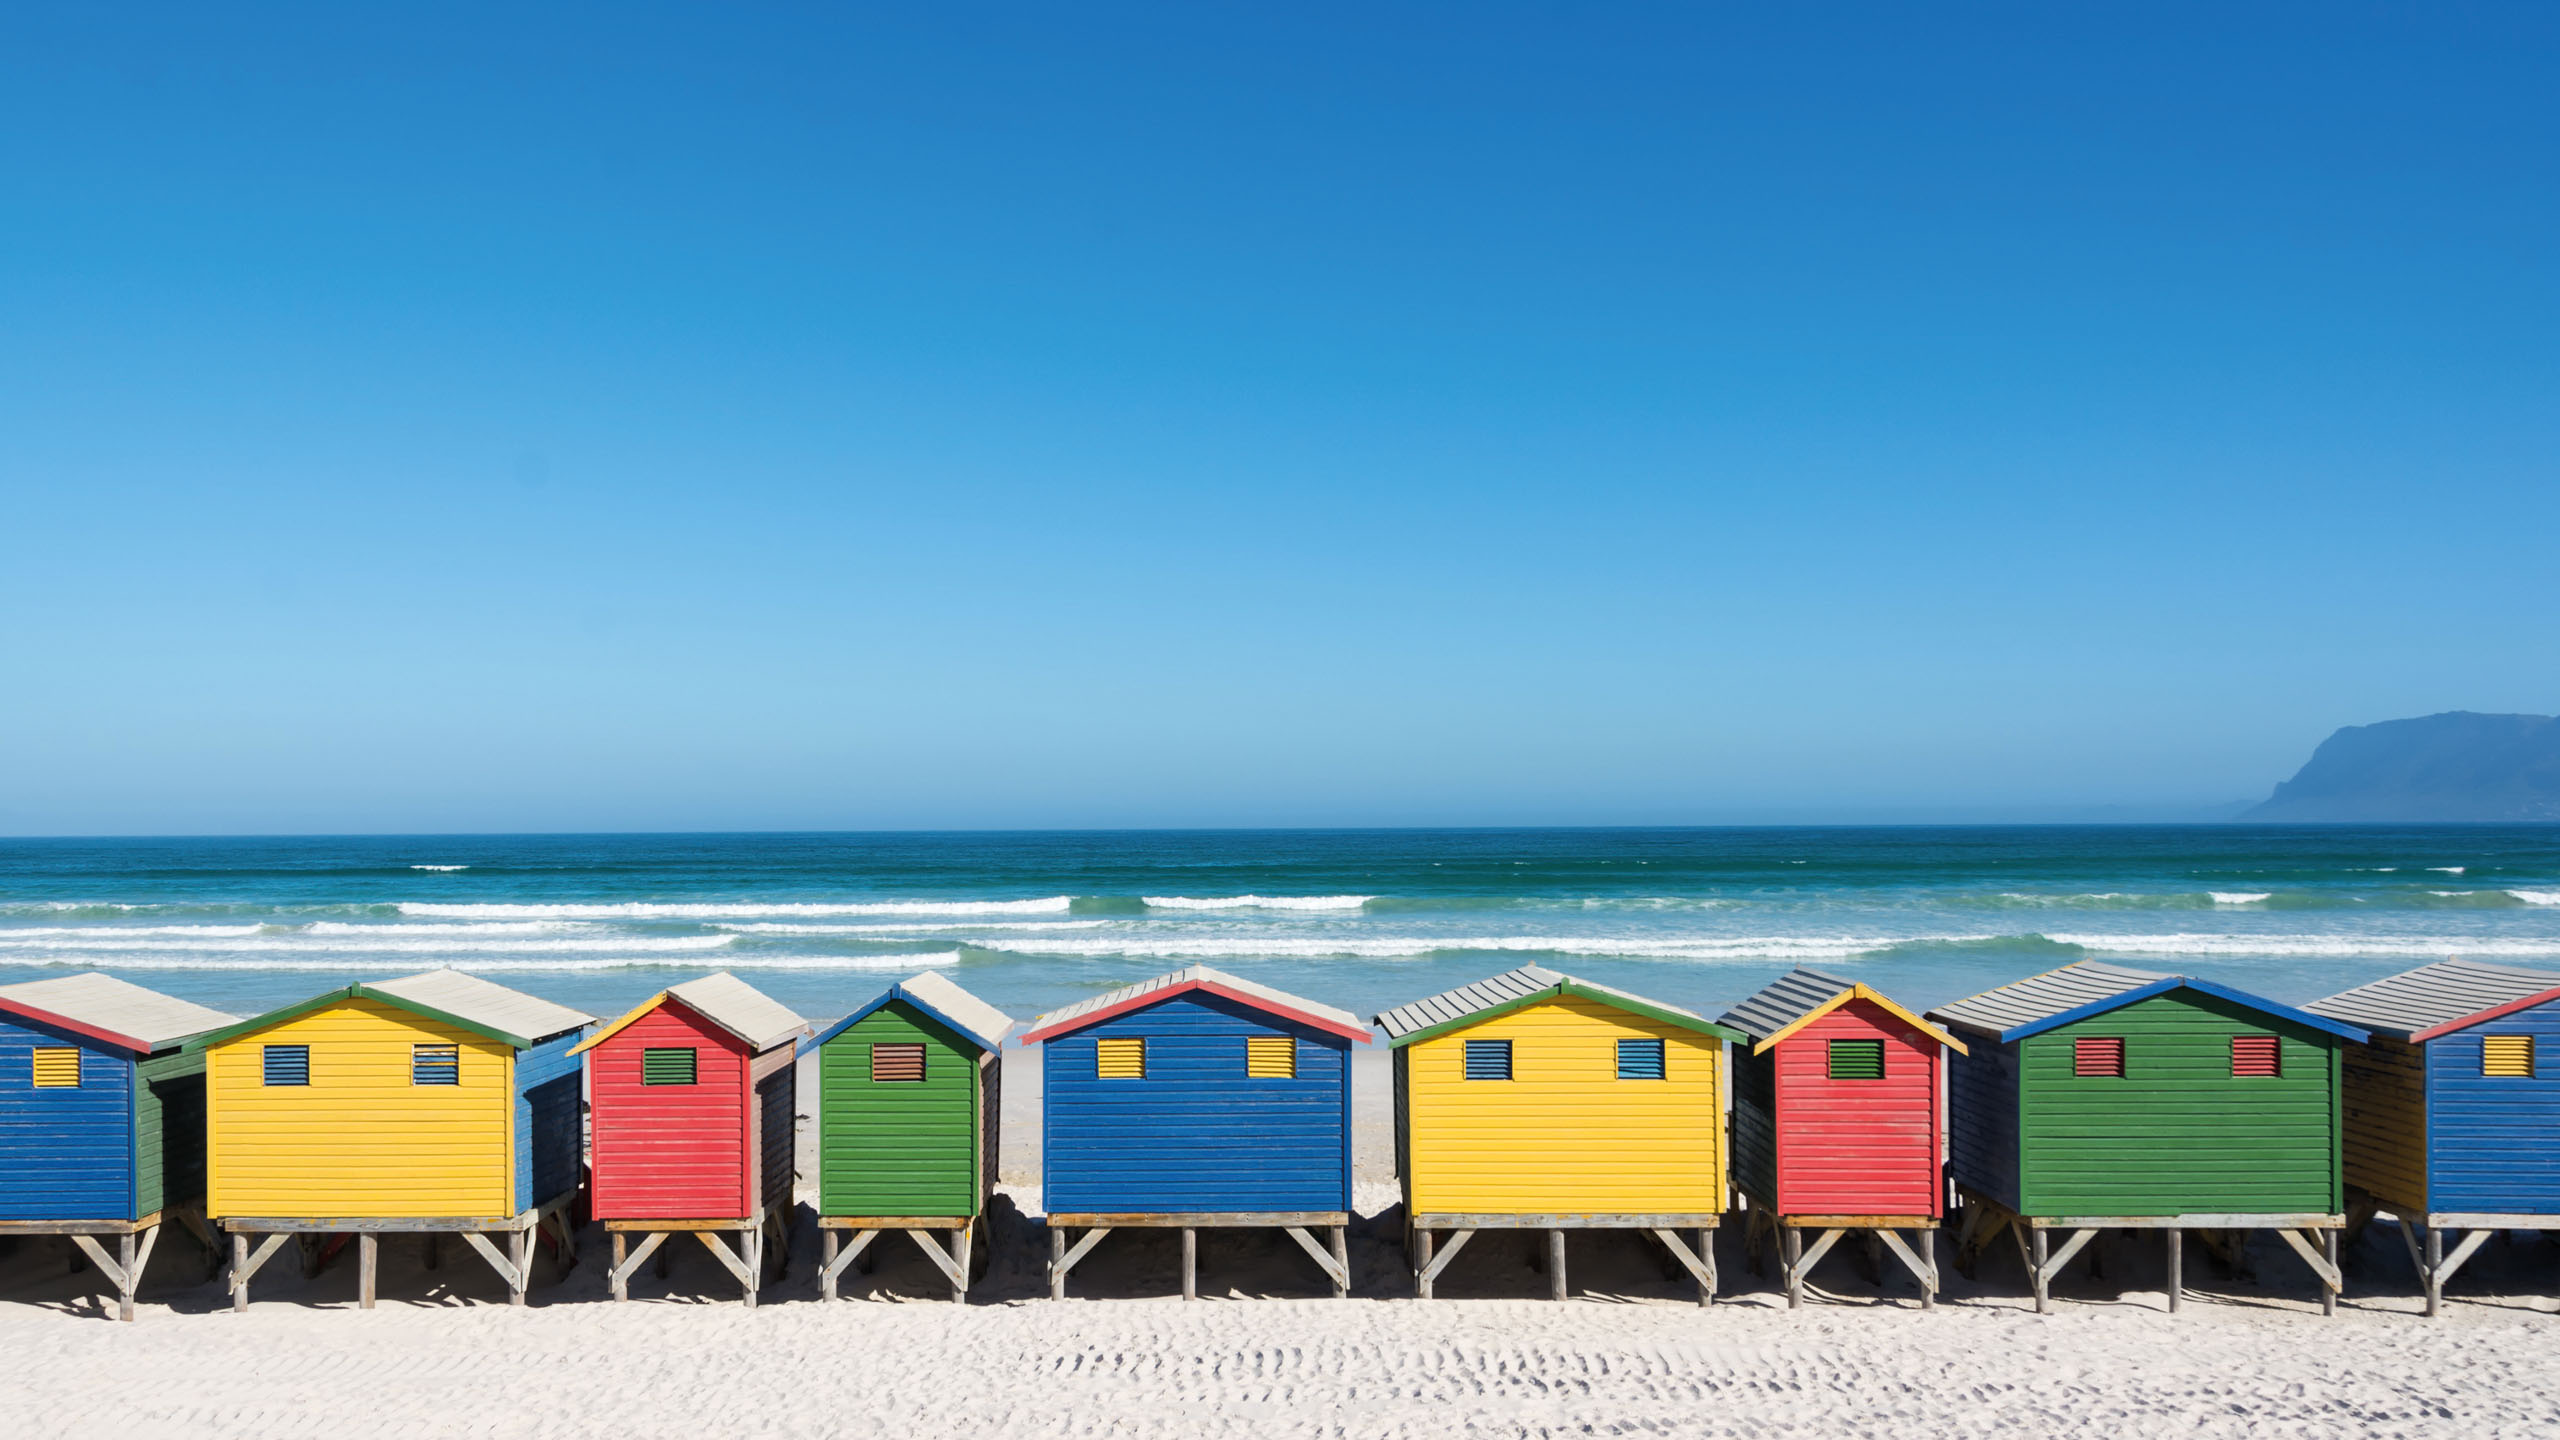 Discover Coastal Beauty and Cosmopolitan Charms in Cape Town, South Africa